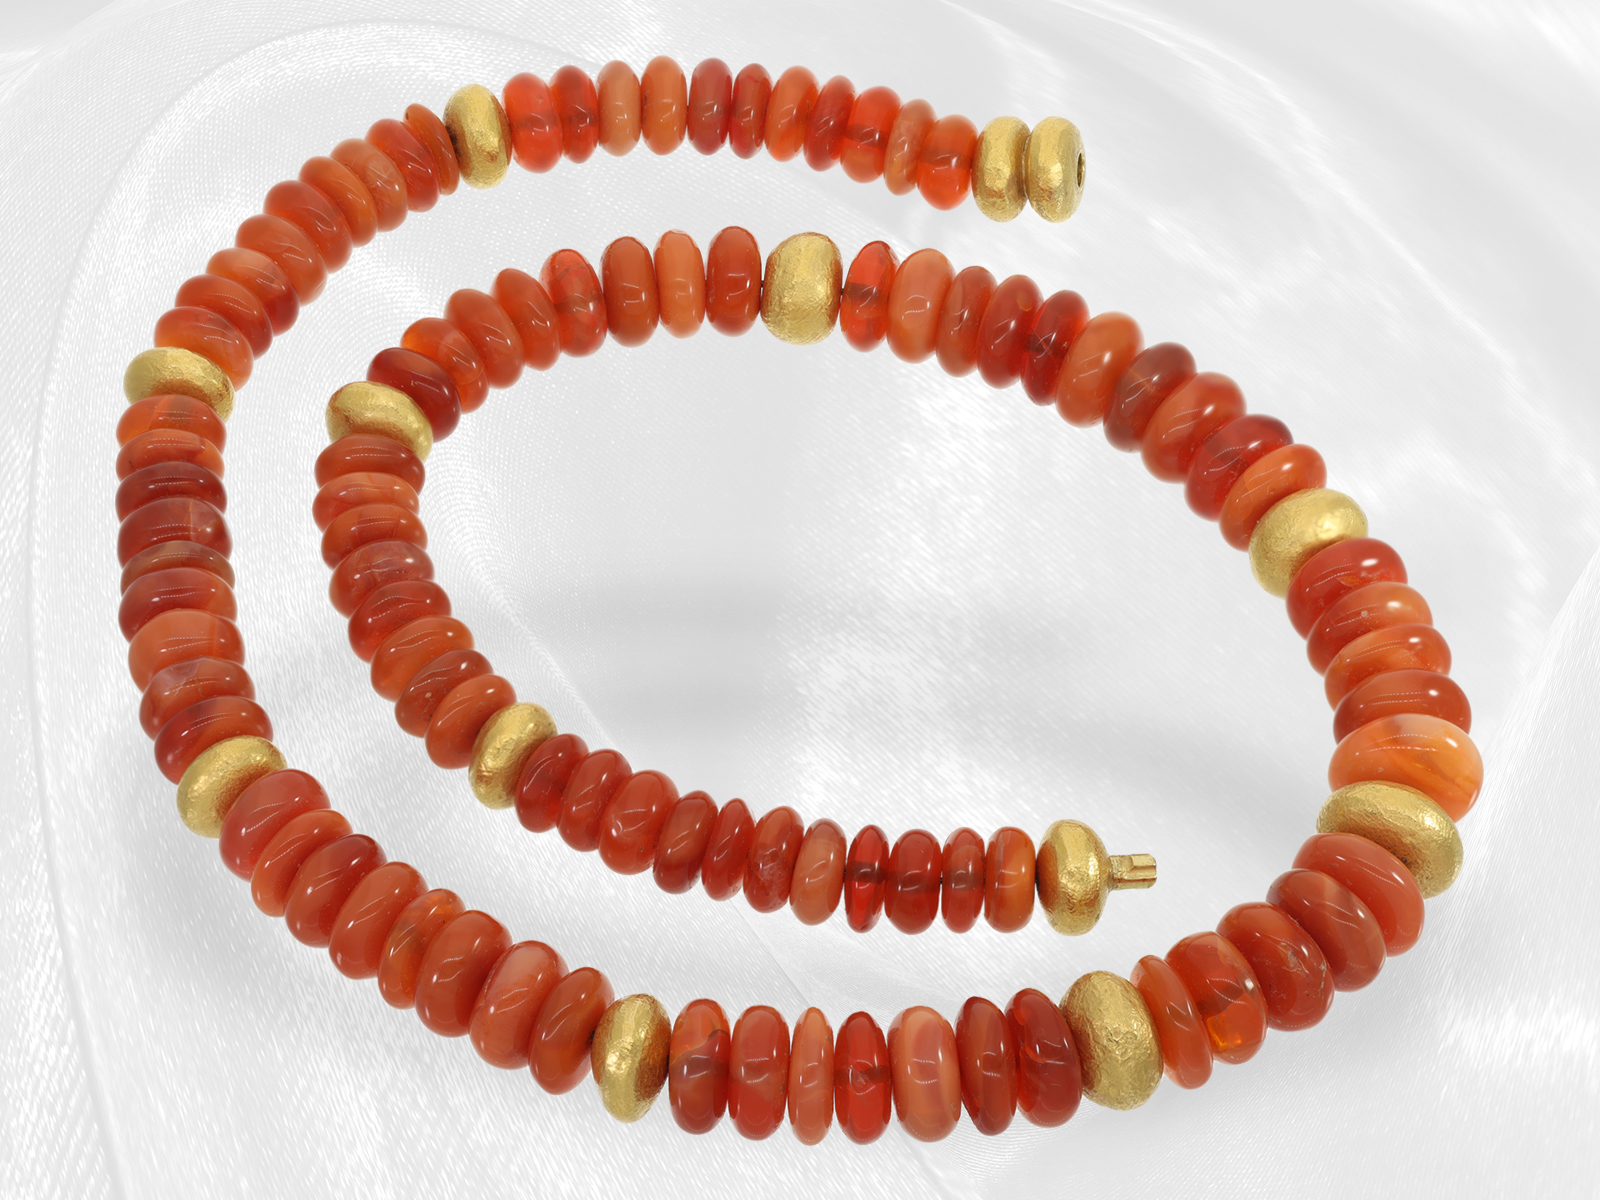 Very valuable necklace made of beautiful Mexican fire opal, like new - Image 5 of 6